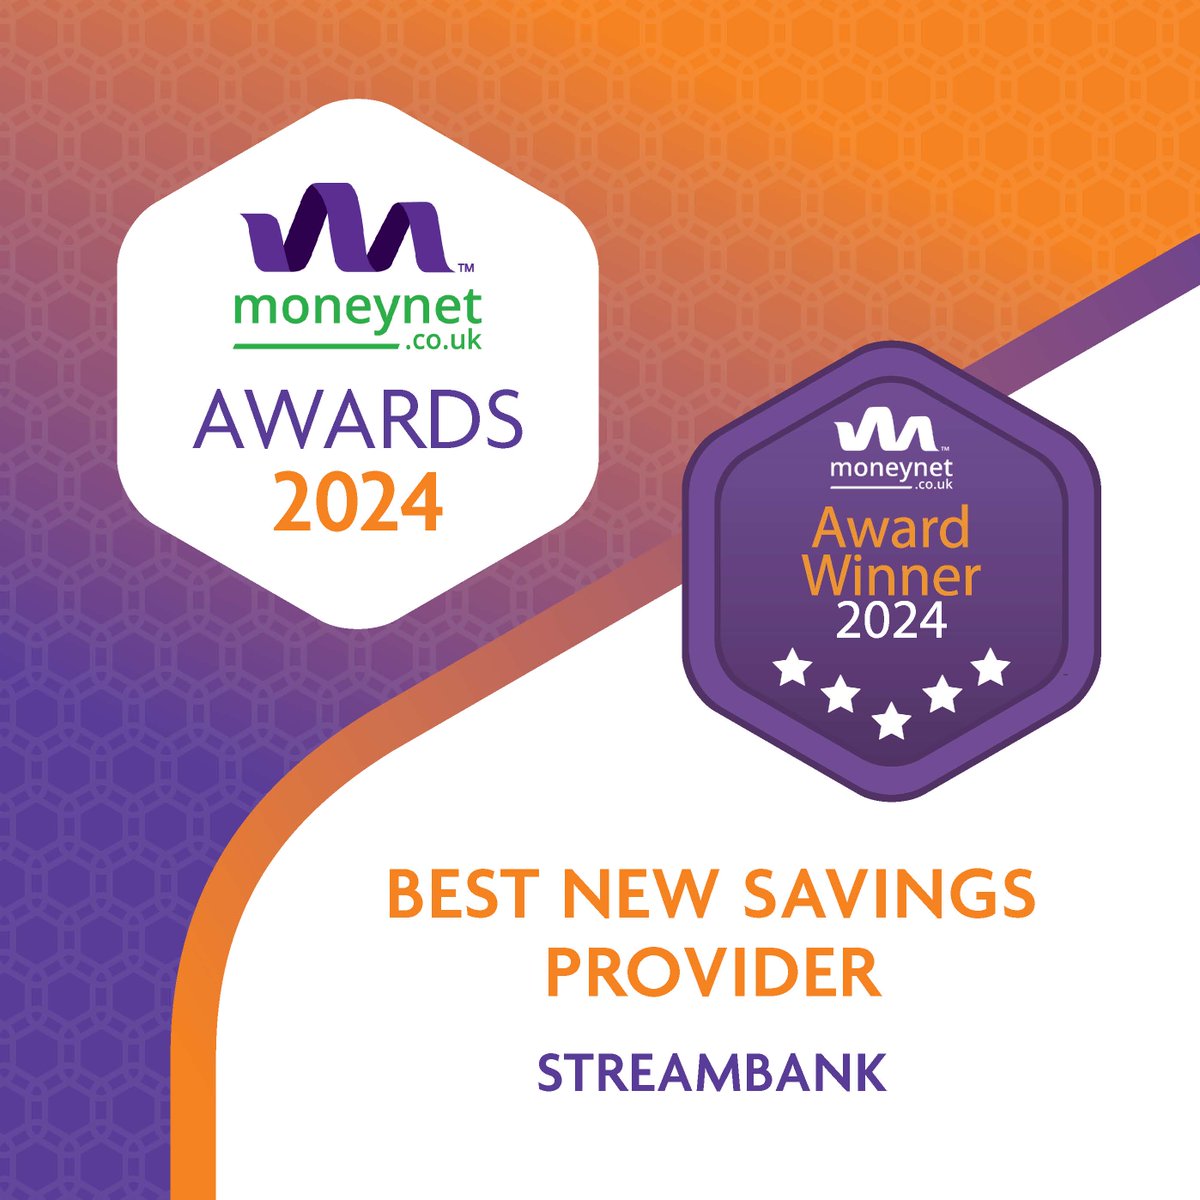 Congratulations to the team @StreamBank1 for winning 'Best New Savings Provider' in the 2024 Moneynet Awards